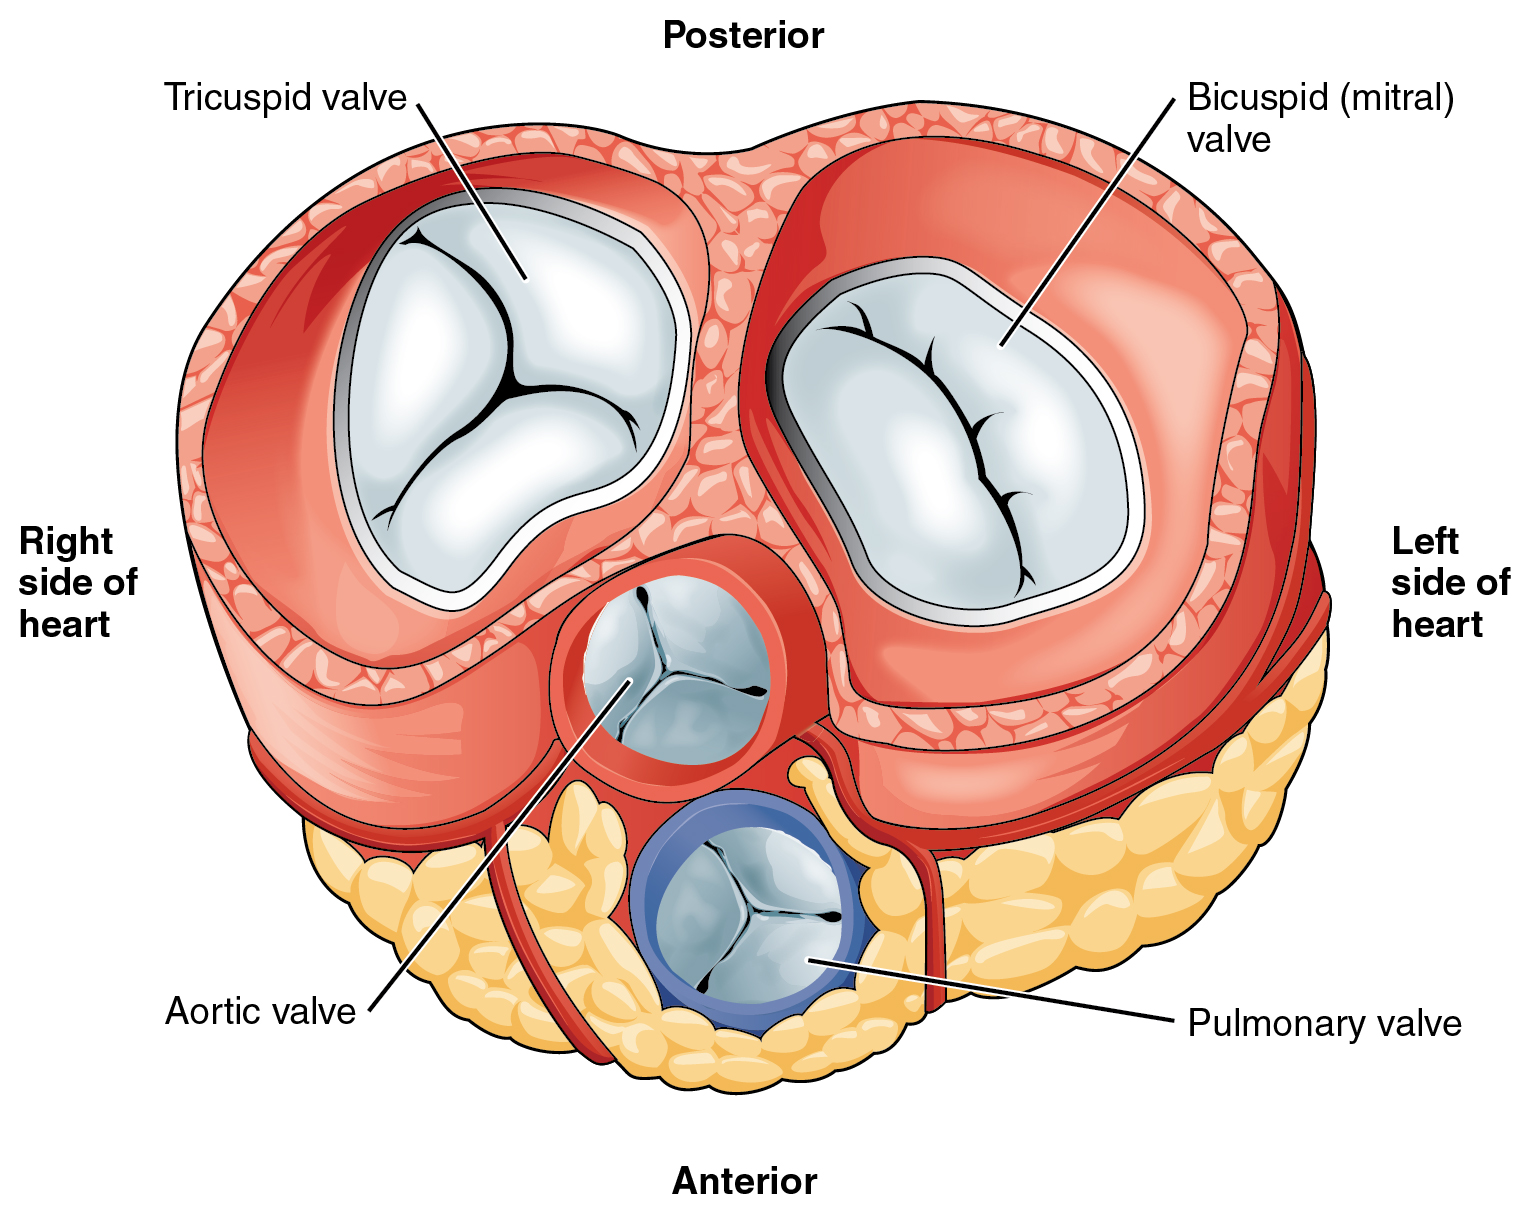 Labeled diagram of transverse section of heart showing the position of all four heart valves anchored in cardiac skeleton. In the anterior half of the heart are the semilunar valves. The anterior-most valve is the pulmonary valve with the aortic valve just posterior to it. In the posterior half of the heart are the atrioventricular valves: tricuspid valve on the right and the mitral valve on the left.